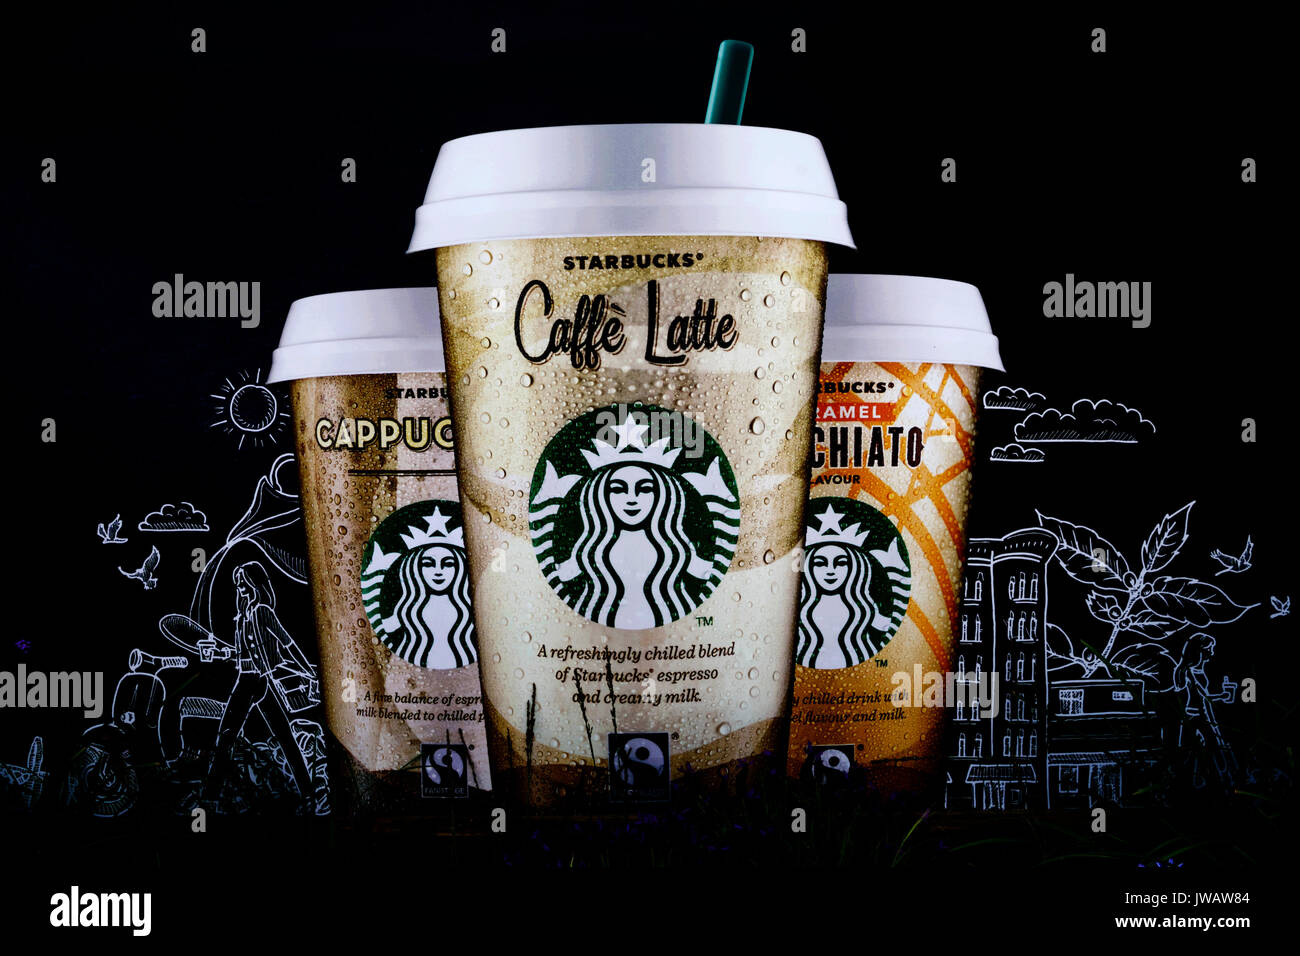 Starbucks coffee Caffe Latte chilled. Brand advertising poster. Stock Photo